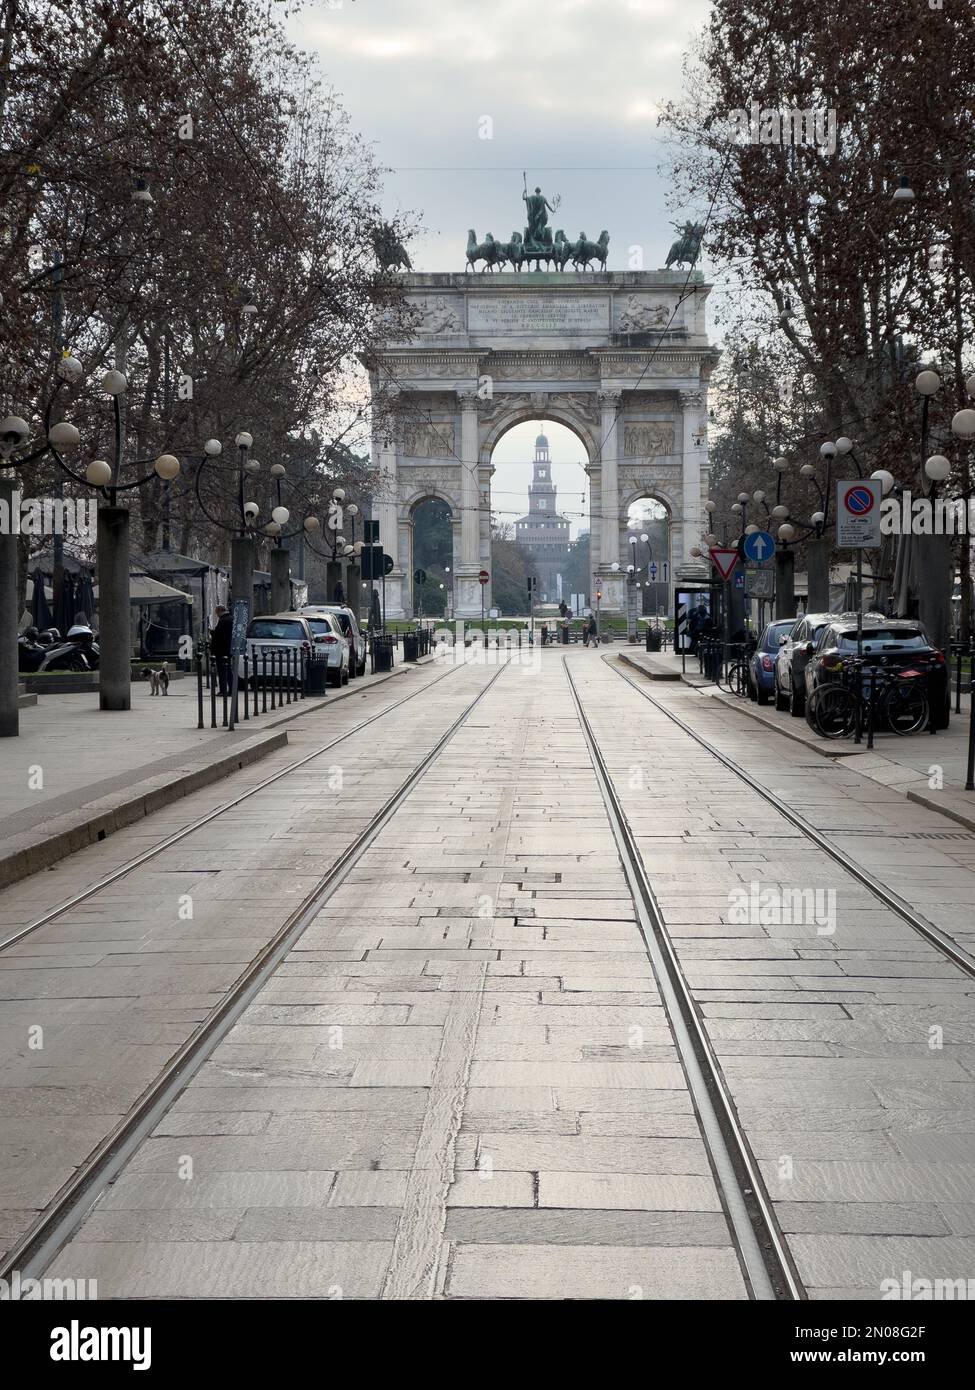 an amazing view of the 'Arco della Pace' from the distance during winter, Milan, Italy Stock Photo